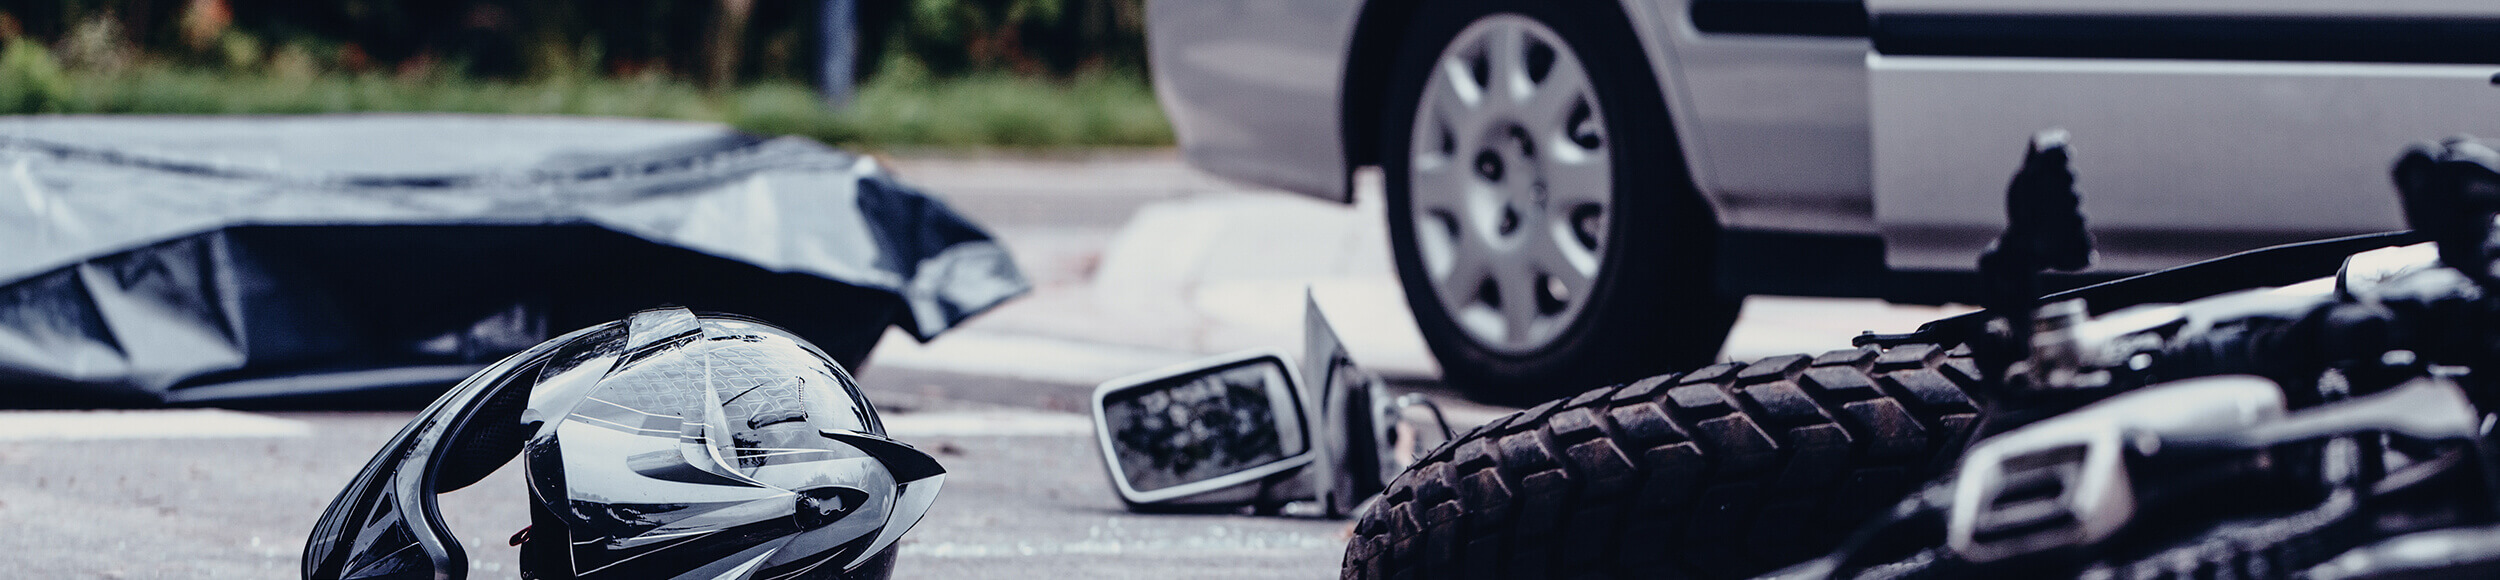 car and motorcycle crash close up to represent auto accidents victims we represent in california